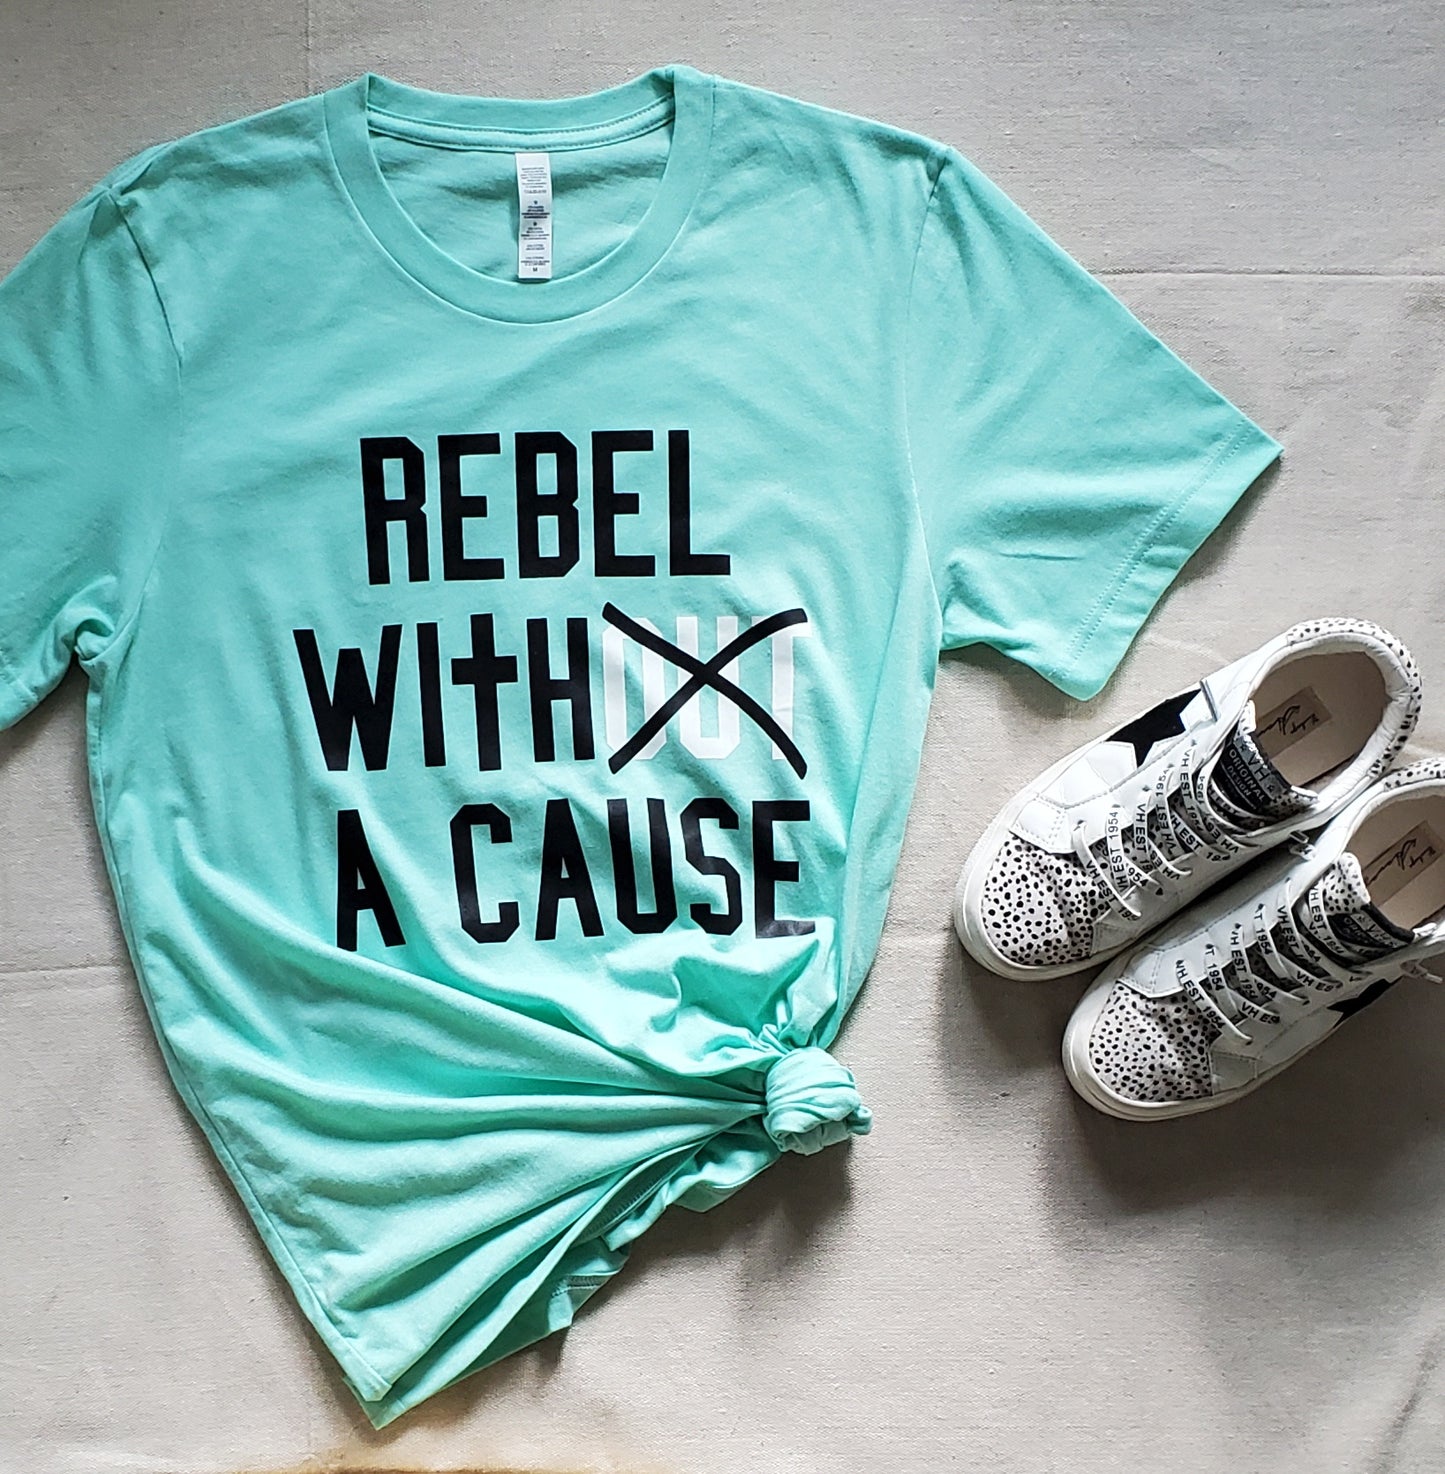 Rebel with a cause / Heavenly soft tshirt